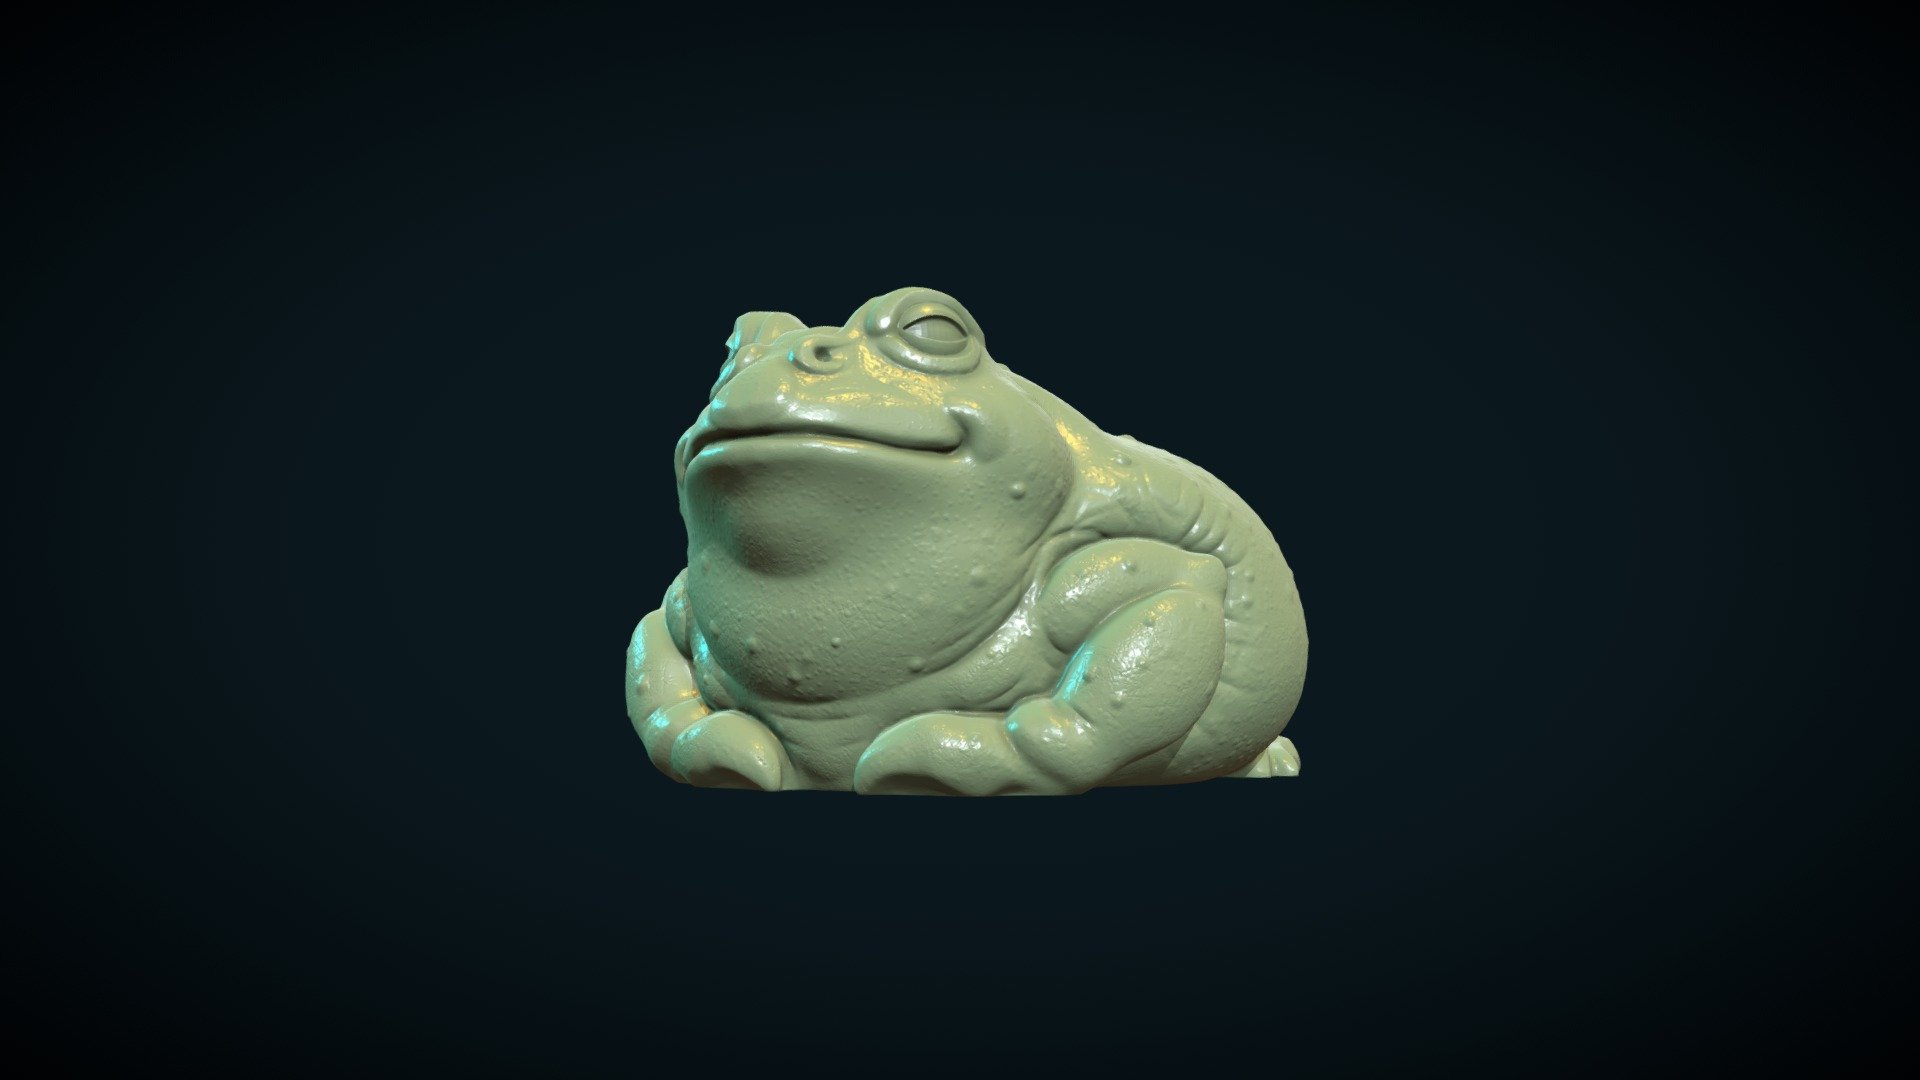 Print ready toad.

Measure units are millimeters, the figure is about 49 mm in width.

Mesh is manifold, no holes, no inverted faces, no bad contiguous edges.

Available formats: .blend, .stl, .obj, .fbx, .dae

Here are two version of the model:

1) Toad_sld.(blend, .stl, .obj, .fbx, .dae) It is solid version of the model that consists of 392654 triangular faces.

2) Toad_hlw.(blend, .stl, .obj, .fbx, .dae) Here is hollow version, wall thickness is about 1mm. It consists of 402584 triangular faces.

For stl there is additional file that contain plug for the hollow version 3d model